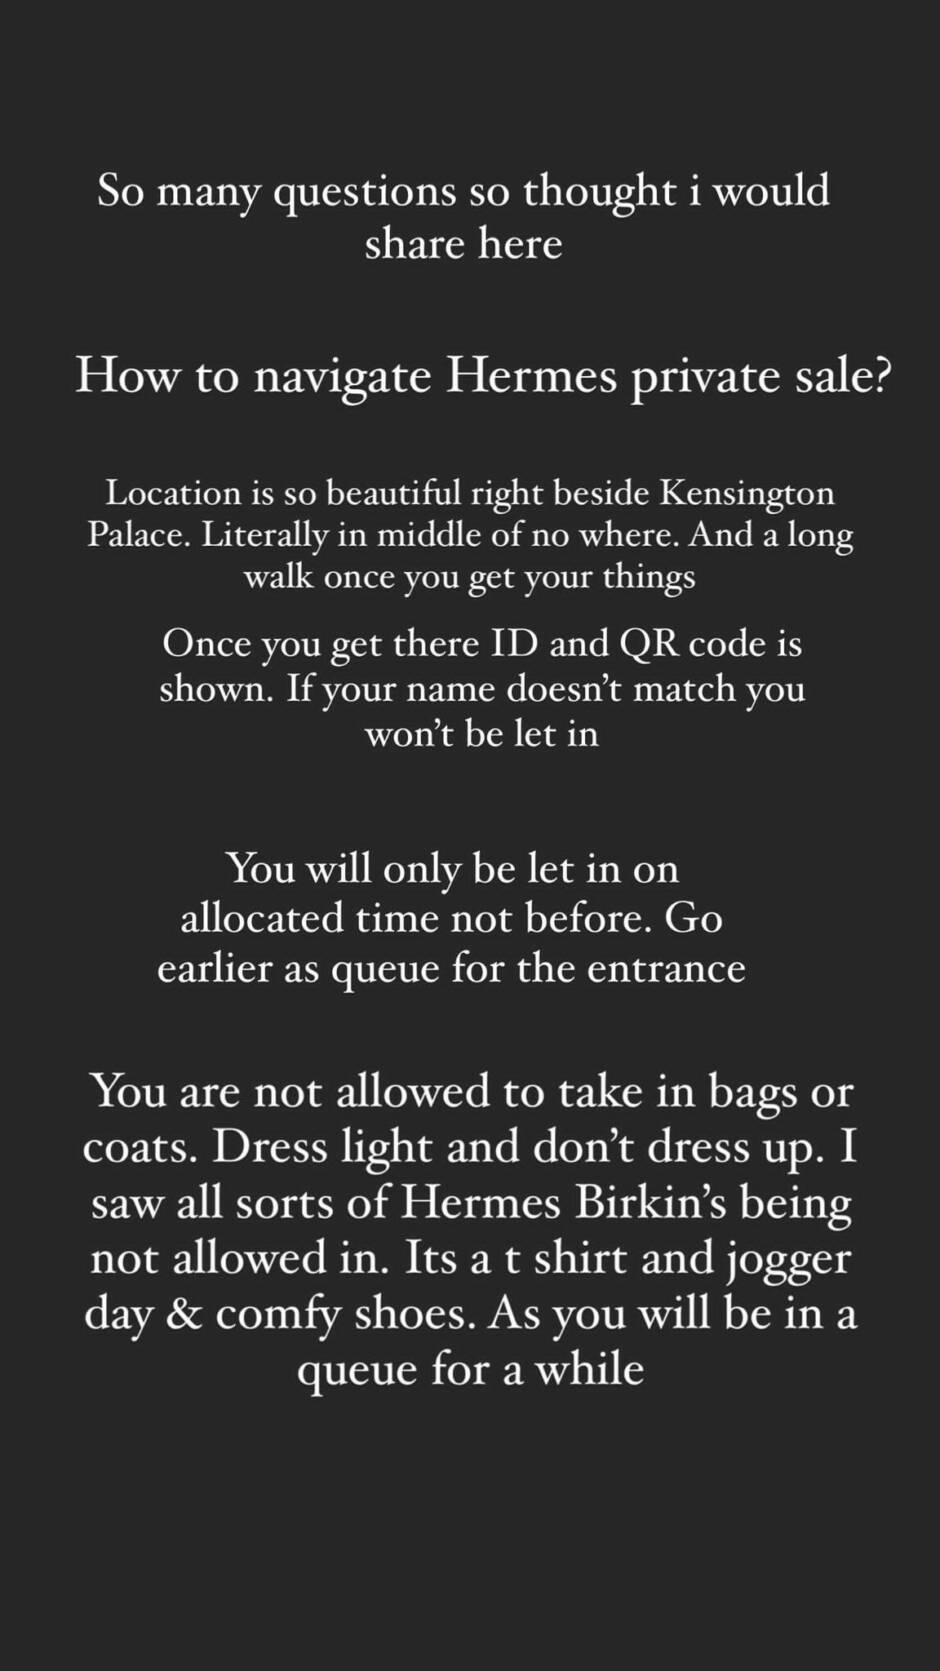 HERMES SALE - What To Expect From Hermes' Public Sale